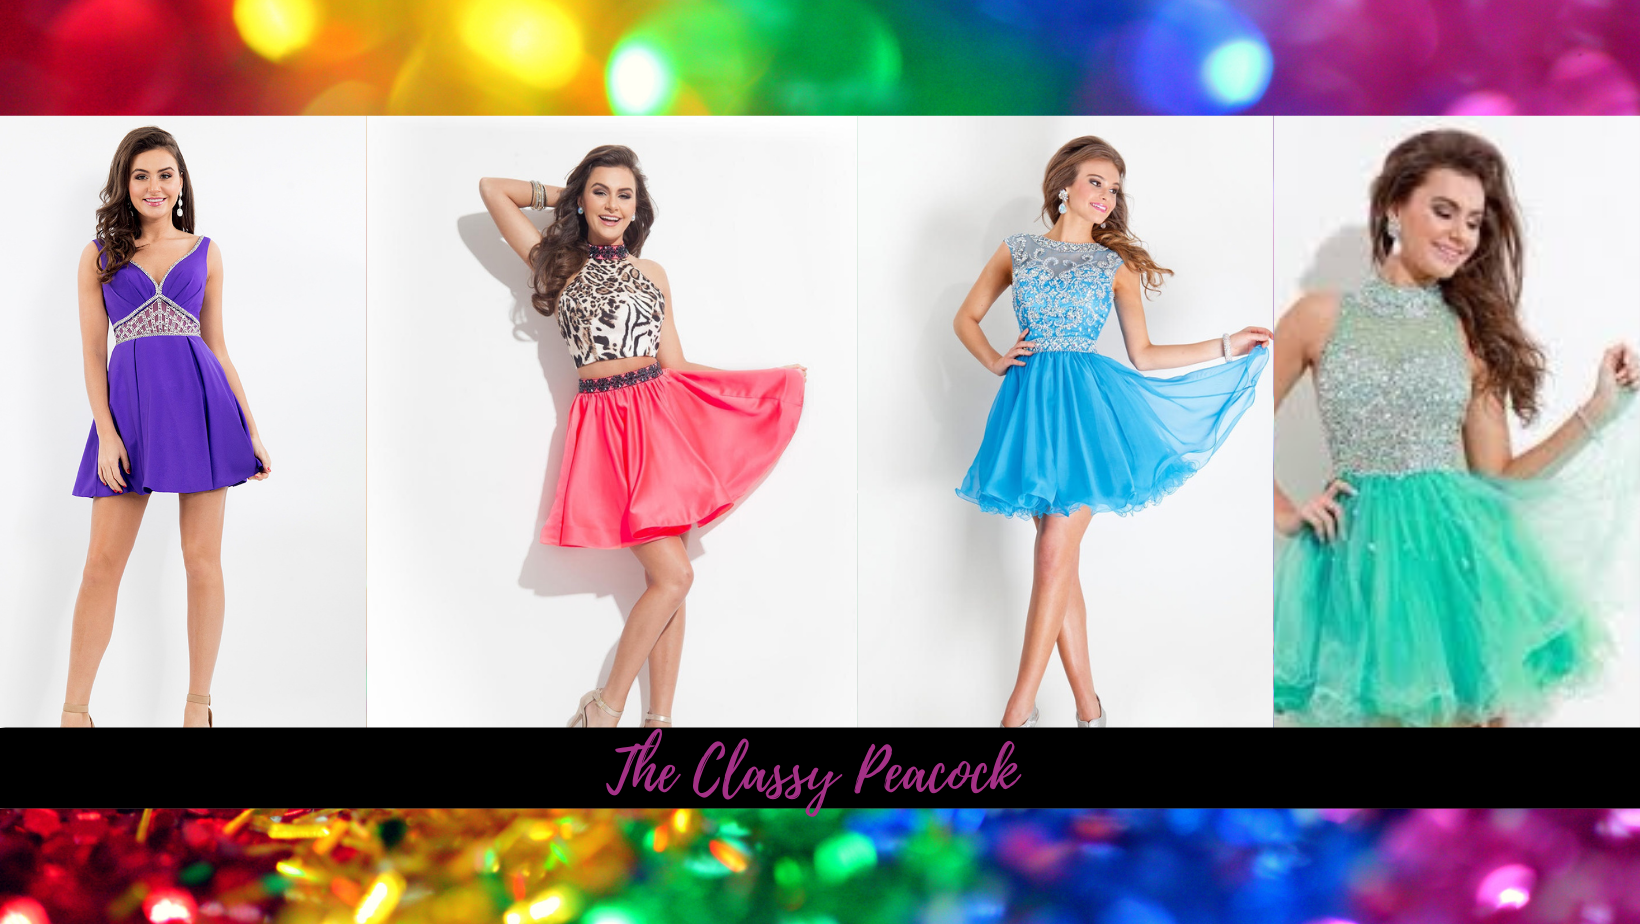 Short formal dresses for Homecoming, Winter formals, spring dances and more available at The Classy Peacock in Bridge City and Nederland Texas